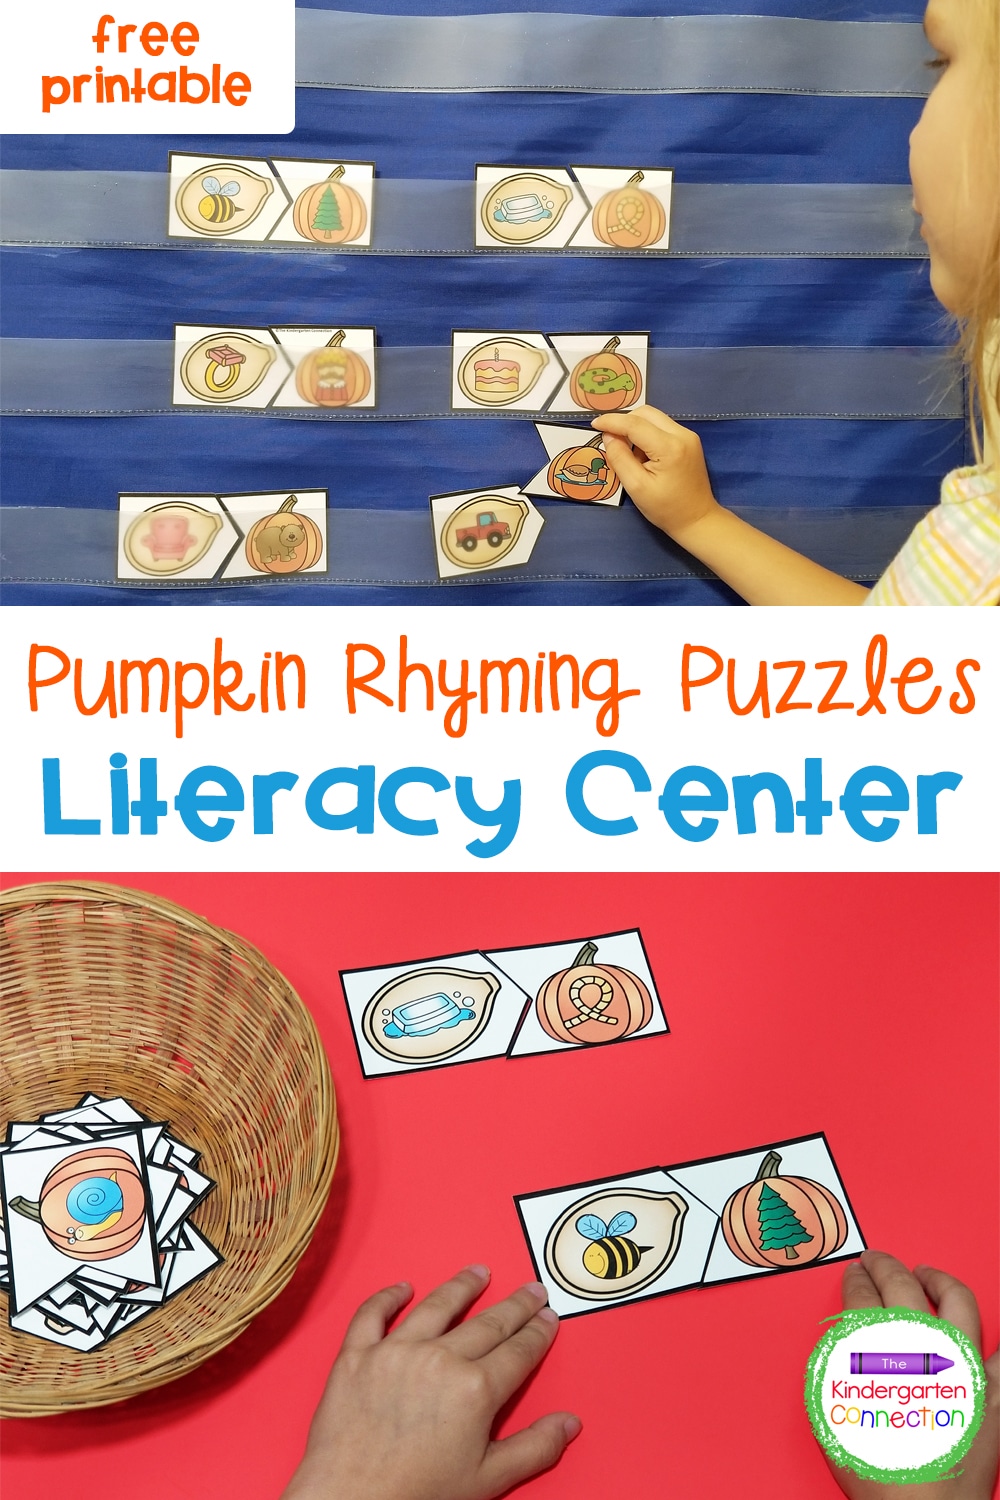 These free Pumpkin Rhyming Puzzles are a fun and low-prep literacy center for Pre-K and Kindergarten students to work on rhymes!